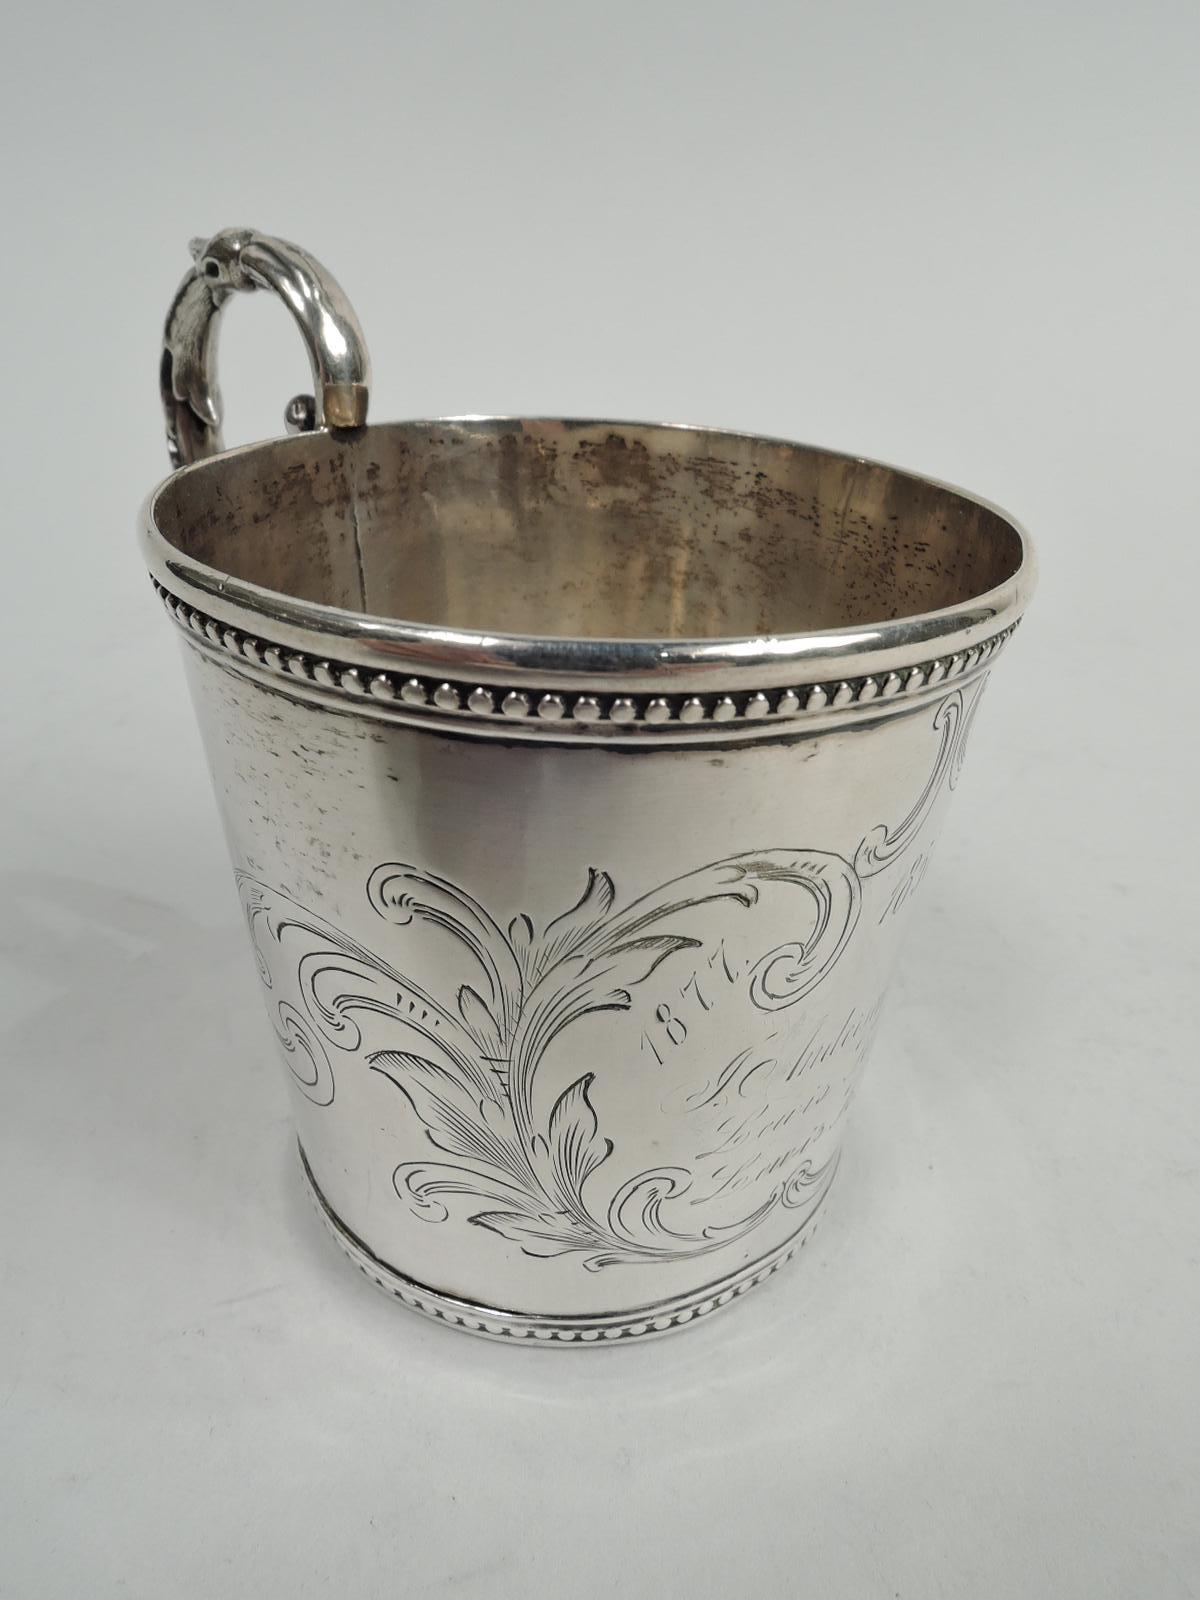 Classical coin silver christening mug. Made by Tifft & Whiting in North Attleboro, Mass., ca 1850. Straight and tapering sides with beaded rims. Three names and 3 birthyears (1851, 1877, and 1908) engraved in leafing scrolled frame. Leaf-capped